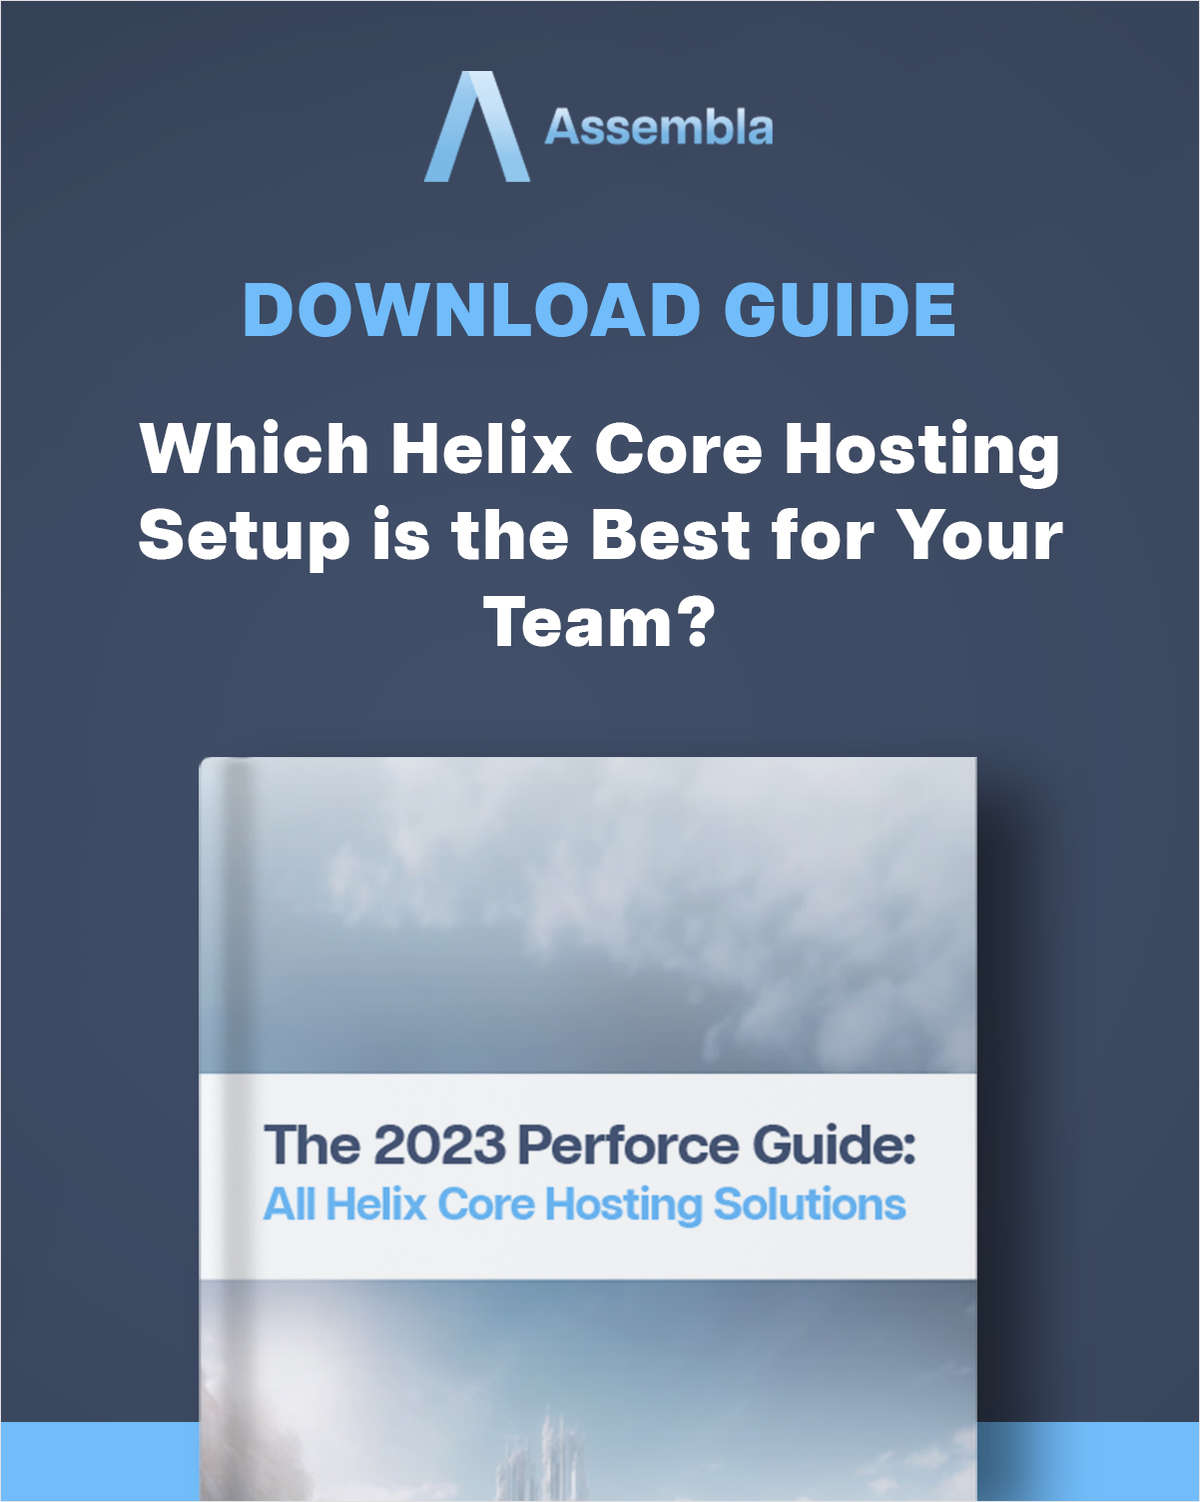 The 2023 Perforce Guide: All Helix Core Hosting Solutions